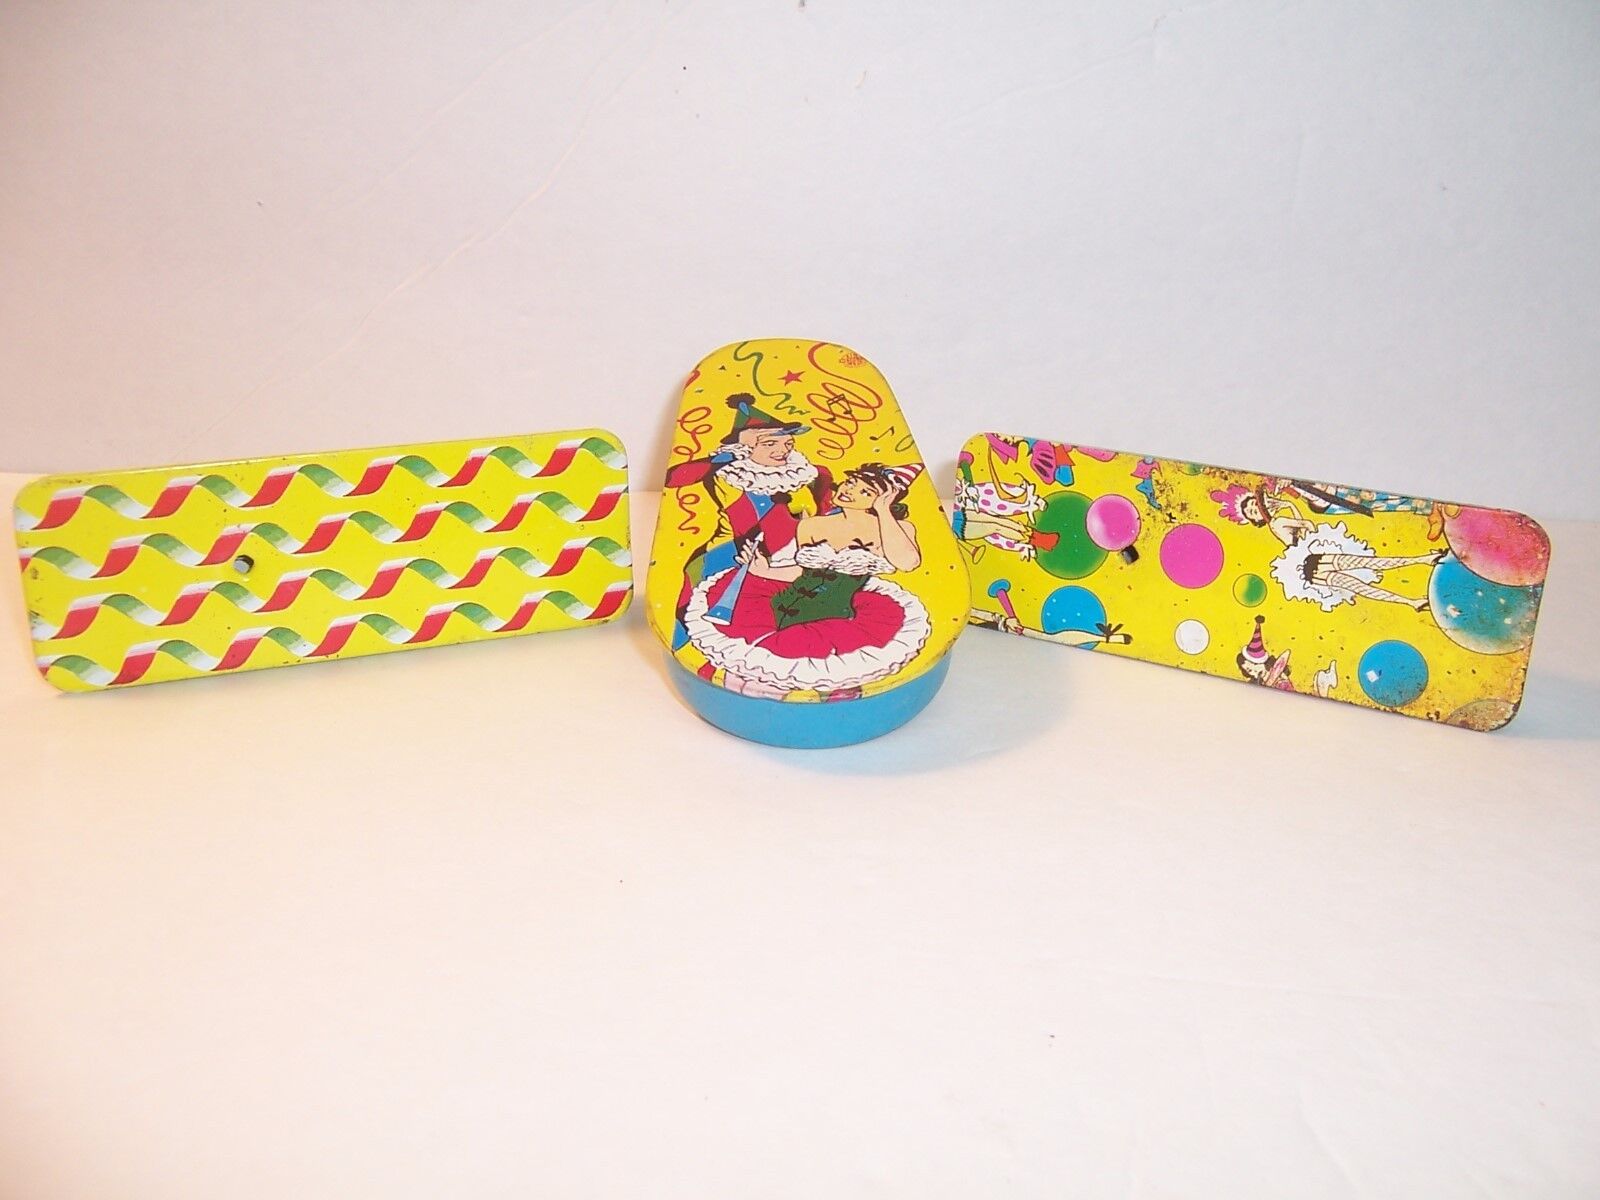 VINTAGE TIN NOISE MAKERS - NEW YEARS / HALLOWEEN - WORK GREAT - LOT OF 3  - VGC